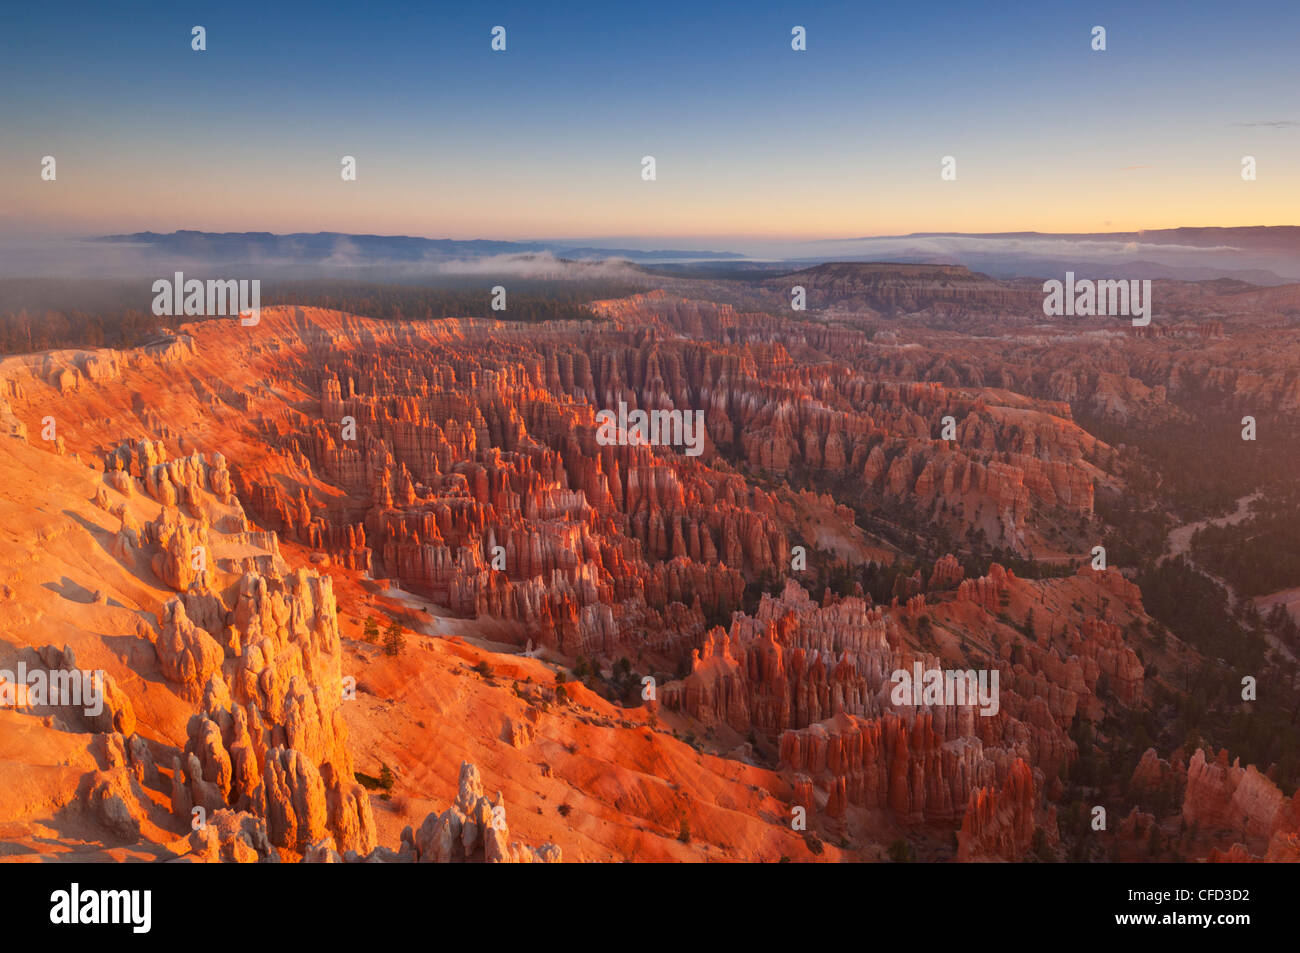 Sandstone hoodoos in Bryce Amphitheater, sunrise with low mist, Bryce Canyon National Park, Utah, United States of America Stock Photo